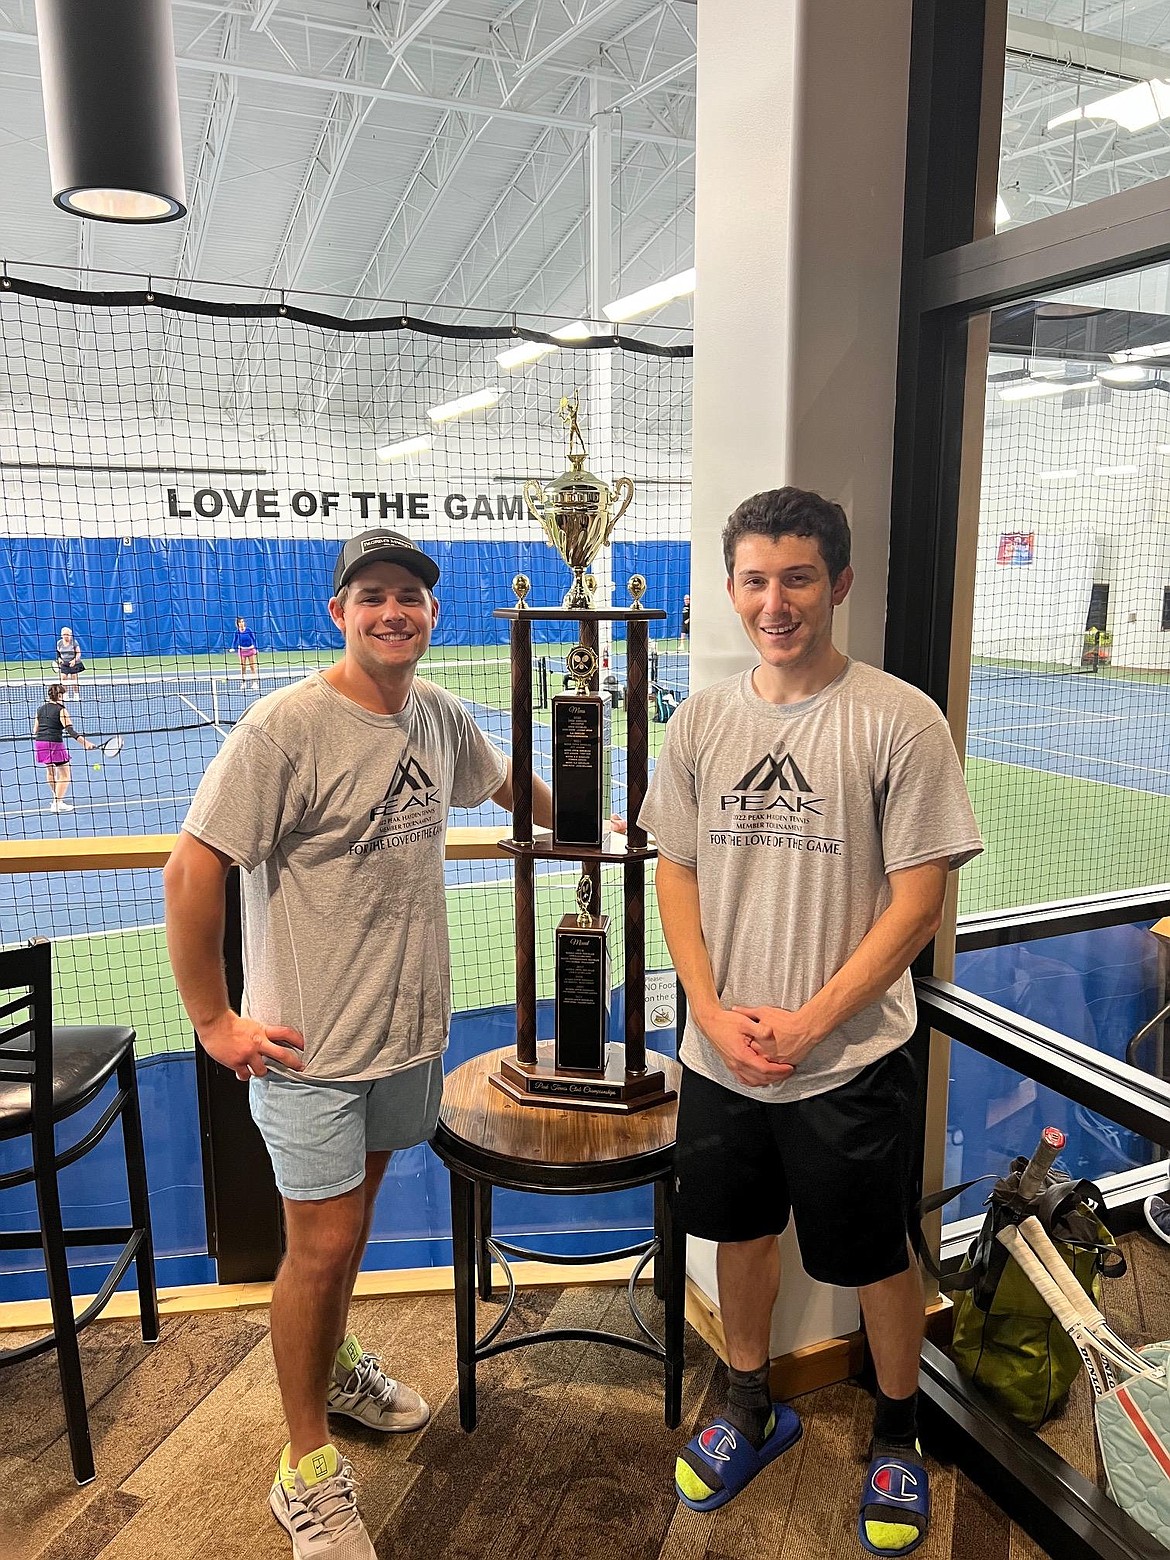 Courtesy photo
The men's open doubles champions in the recent Peak Hayden member tennis tournament were, from left, Mike Hamilton and Spencer Shade, who defeated Brady Tommerup and Connor Judson 6-4, 6-2.